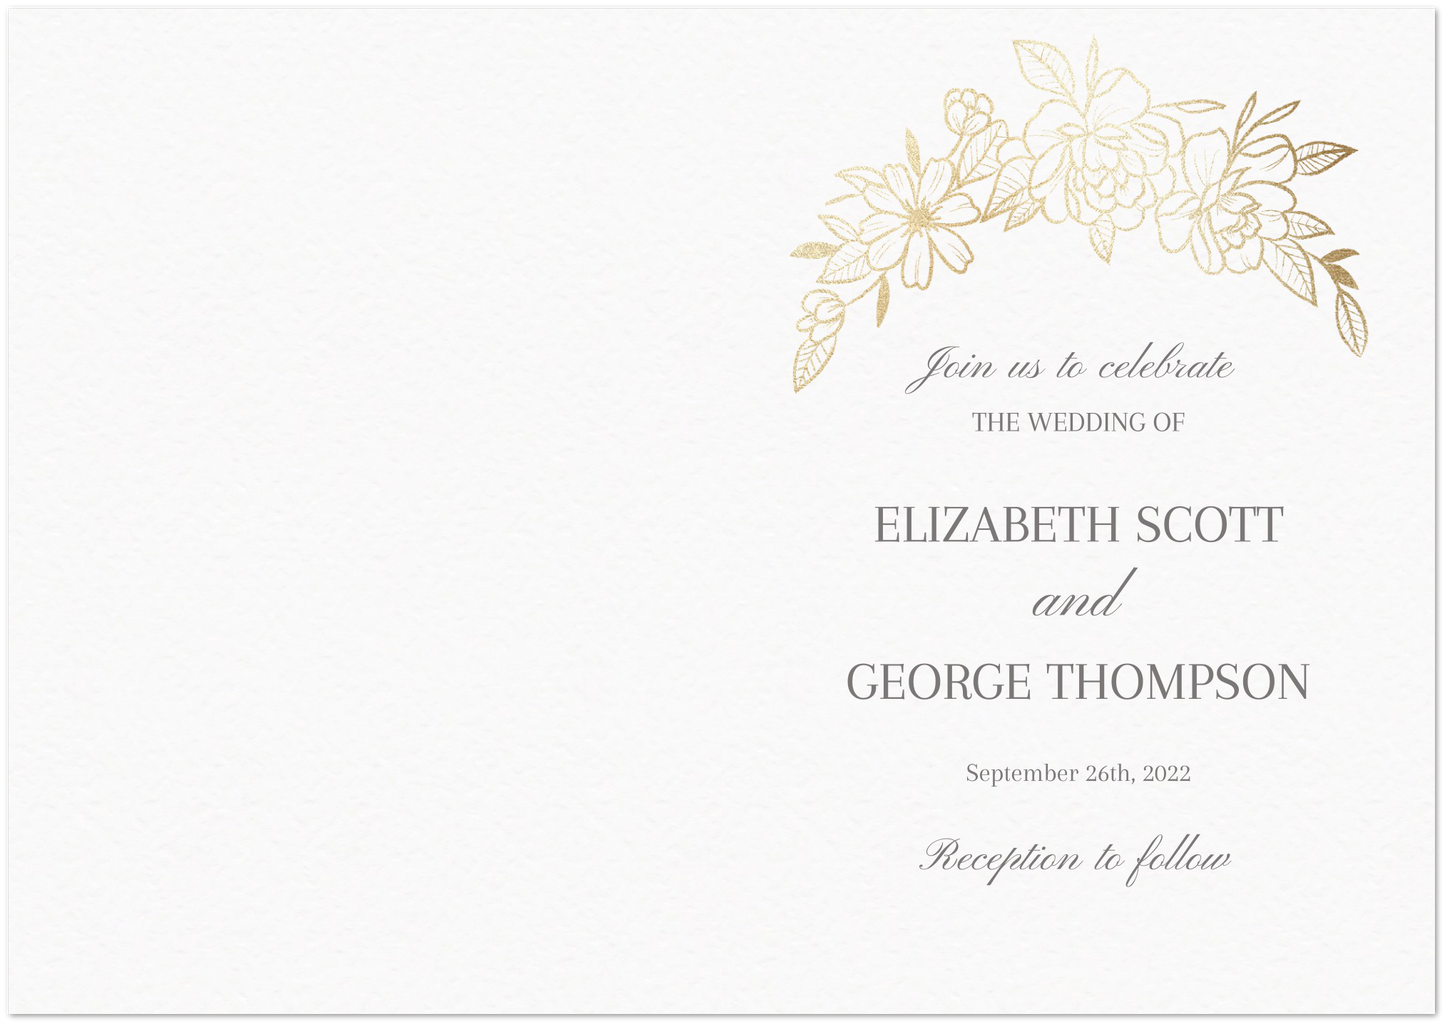 Golden Wreath Wedding Invitations (sold as packs of 10 folded cards with white envelopes)